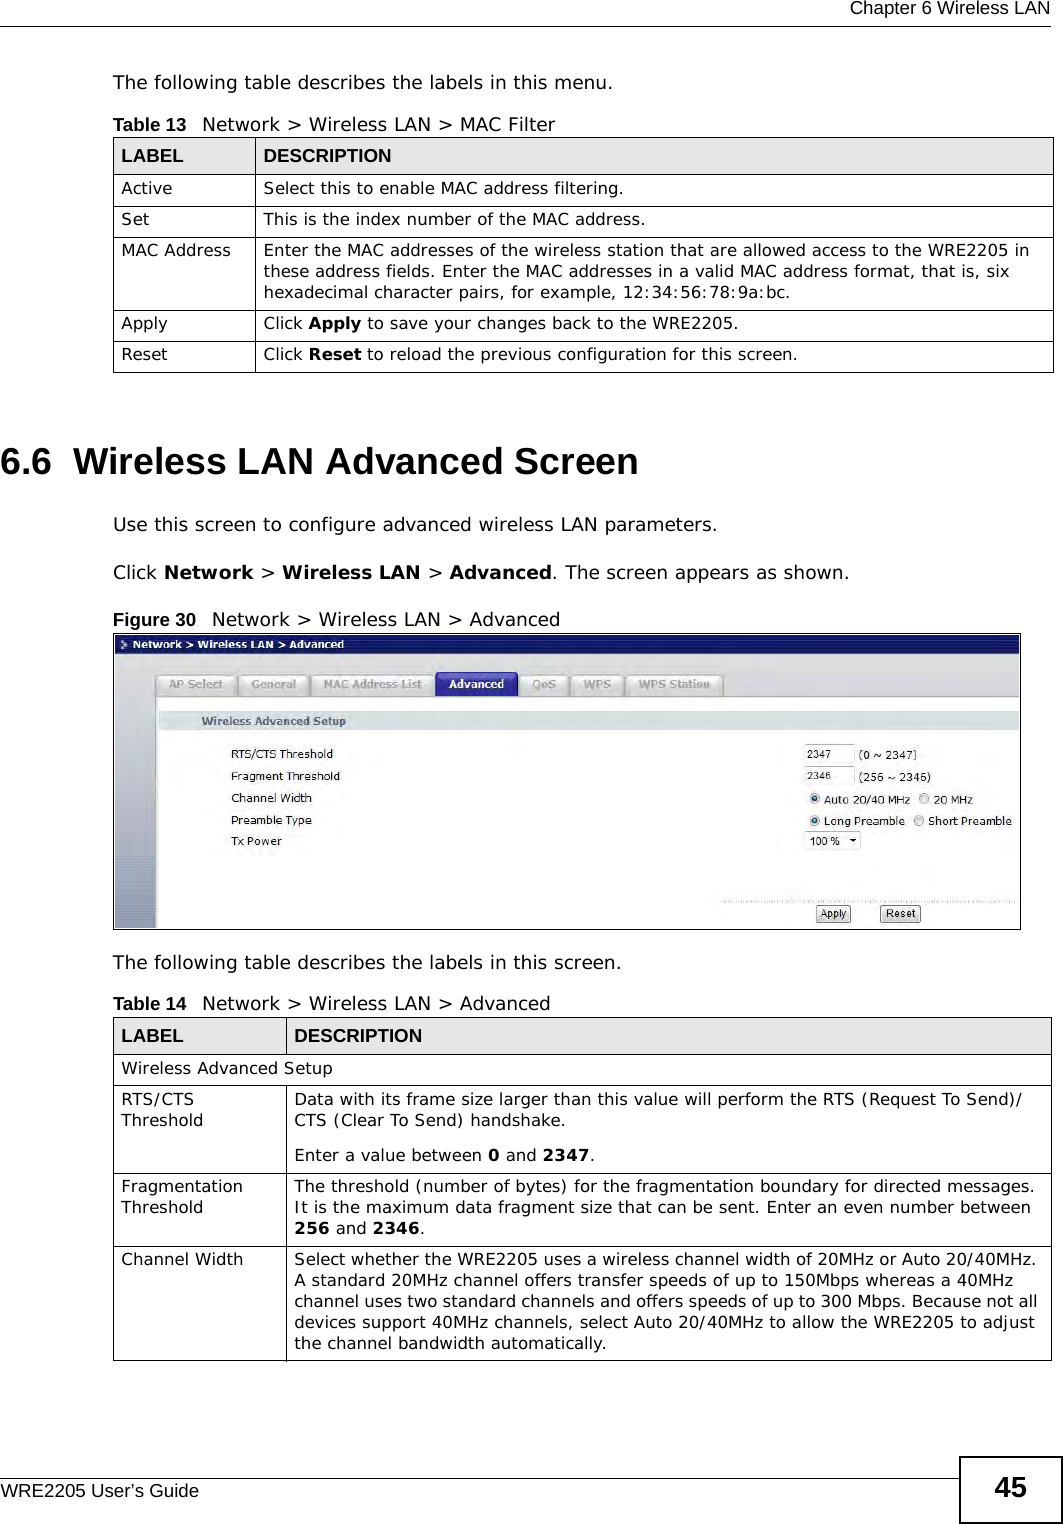  Chapter 6 Wireless LANWRE2205 User’s Guide 45The following table describes the labels in this menu.6.6  Wireless LAN Advanced ScreenUse this screen to configure advanced wireless LAN parameters.Click Network &gt; Wireless LAN &gt; Advanced. The screen appears as shown.Figure 30   Network &gt; Wireless LAN &gt; Advanced The following table describes the labels in this screen. Table 13   Network &gt; Wireless LAN &gt; MAC FilterLABEL DESCRIPTIONActive Select this to enable MAC address filtering.Set This is the index number of the MAC address.MAC Address Enter the MAC addresses of the wireless station that are allowed access to the WRE2205 in these address fields. Enter the MAC addresses in a valid MAC address format, that is, six hexadecimal character pairs, for example, 12:34:56:78:9a:bc.Apply Click Apply to save your changes back to the WRE2205.Reset Click Reset to reload the previous configuration for this screen.Table 14   Network &gt; Wireless LAN &gt; AdvancedLABEL DESCRIPTIONWireless Advanced SetupRTS/CTS Threshold Data with its frame size larger than this value will perform the RTS (Request To Send)/CTS (Clear To Send) handshake. Enter a value between 0 and 2347. Fragmentation Threshold The threshold (number of bytes) for the fragmentation boundary for directed messages. It is the maximum data fragment size that can be sent. Enter an even number between 256 and 2346.Channel Width Select whether the WRE2205 uses a wireless channel width of 20MHz or Auto 20/40MHz. A standard 20MHz channel offers transfer speeds of up to 150Mbps whereas a 40MHz channel uses two standard channels and offers speeds of up to 300 Mbps. Because not all devices support 40MHz channels, select Auto 20/40MHz to allow the WRE2205 to adjust the channel bandwidth automatically.